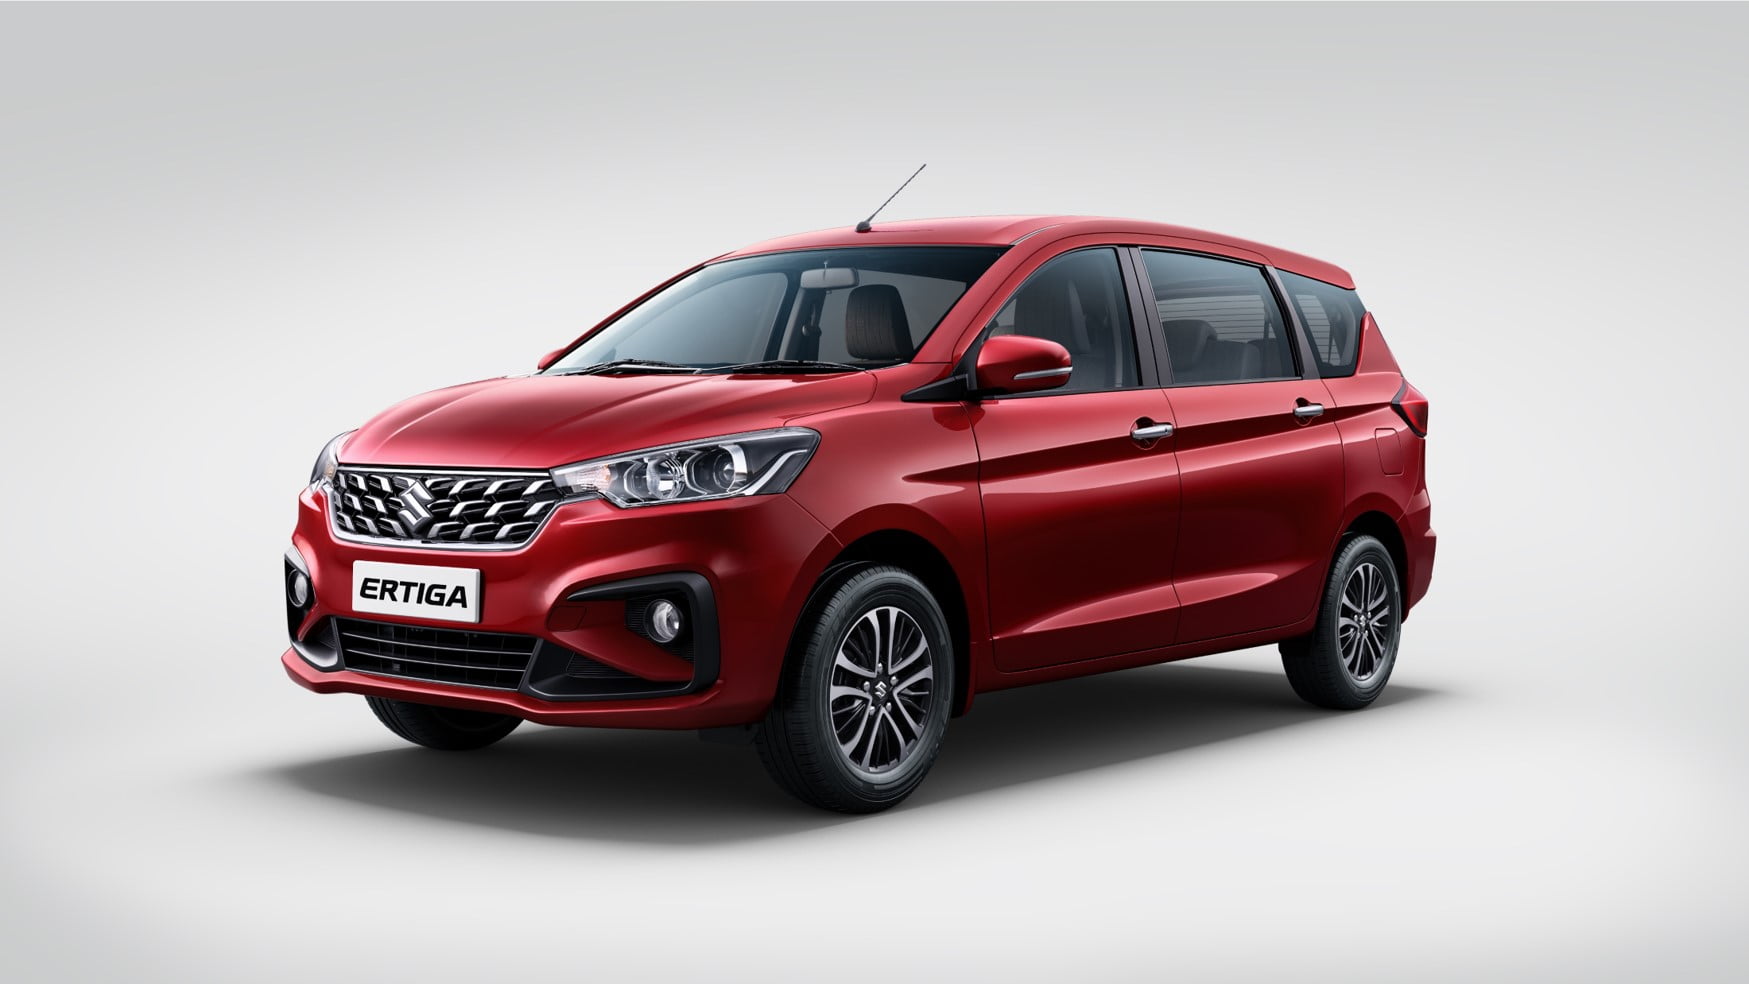 2022 Maruti Ertiga Launched With New Powertrain and Four Airbags (1)